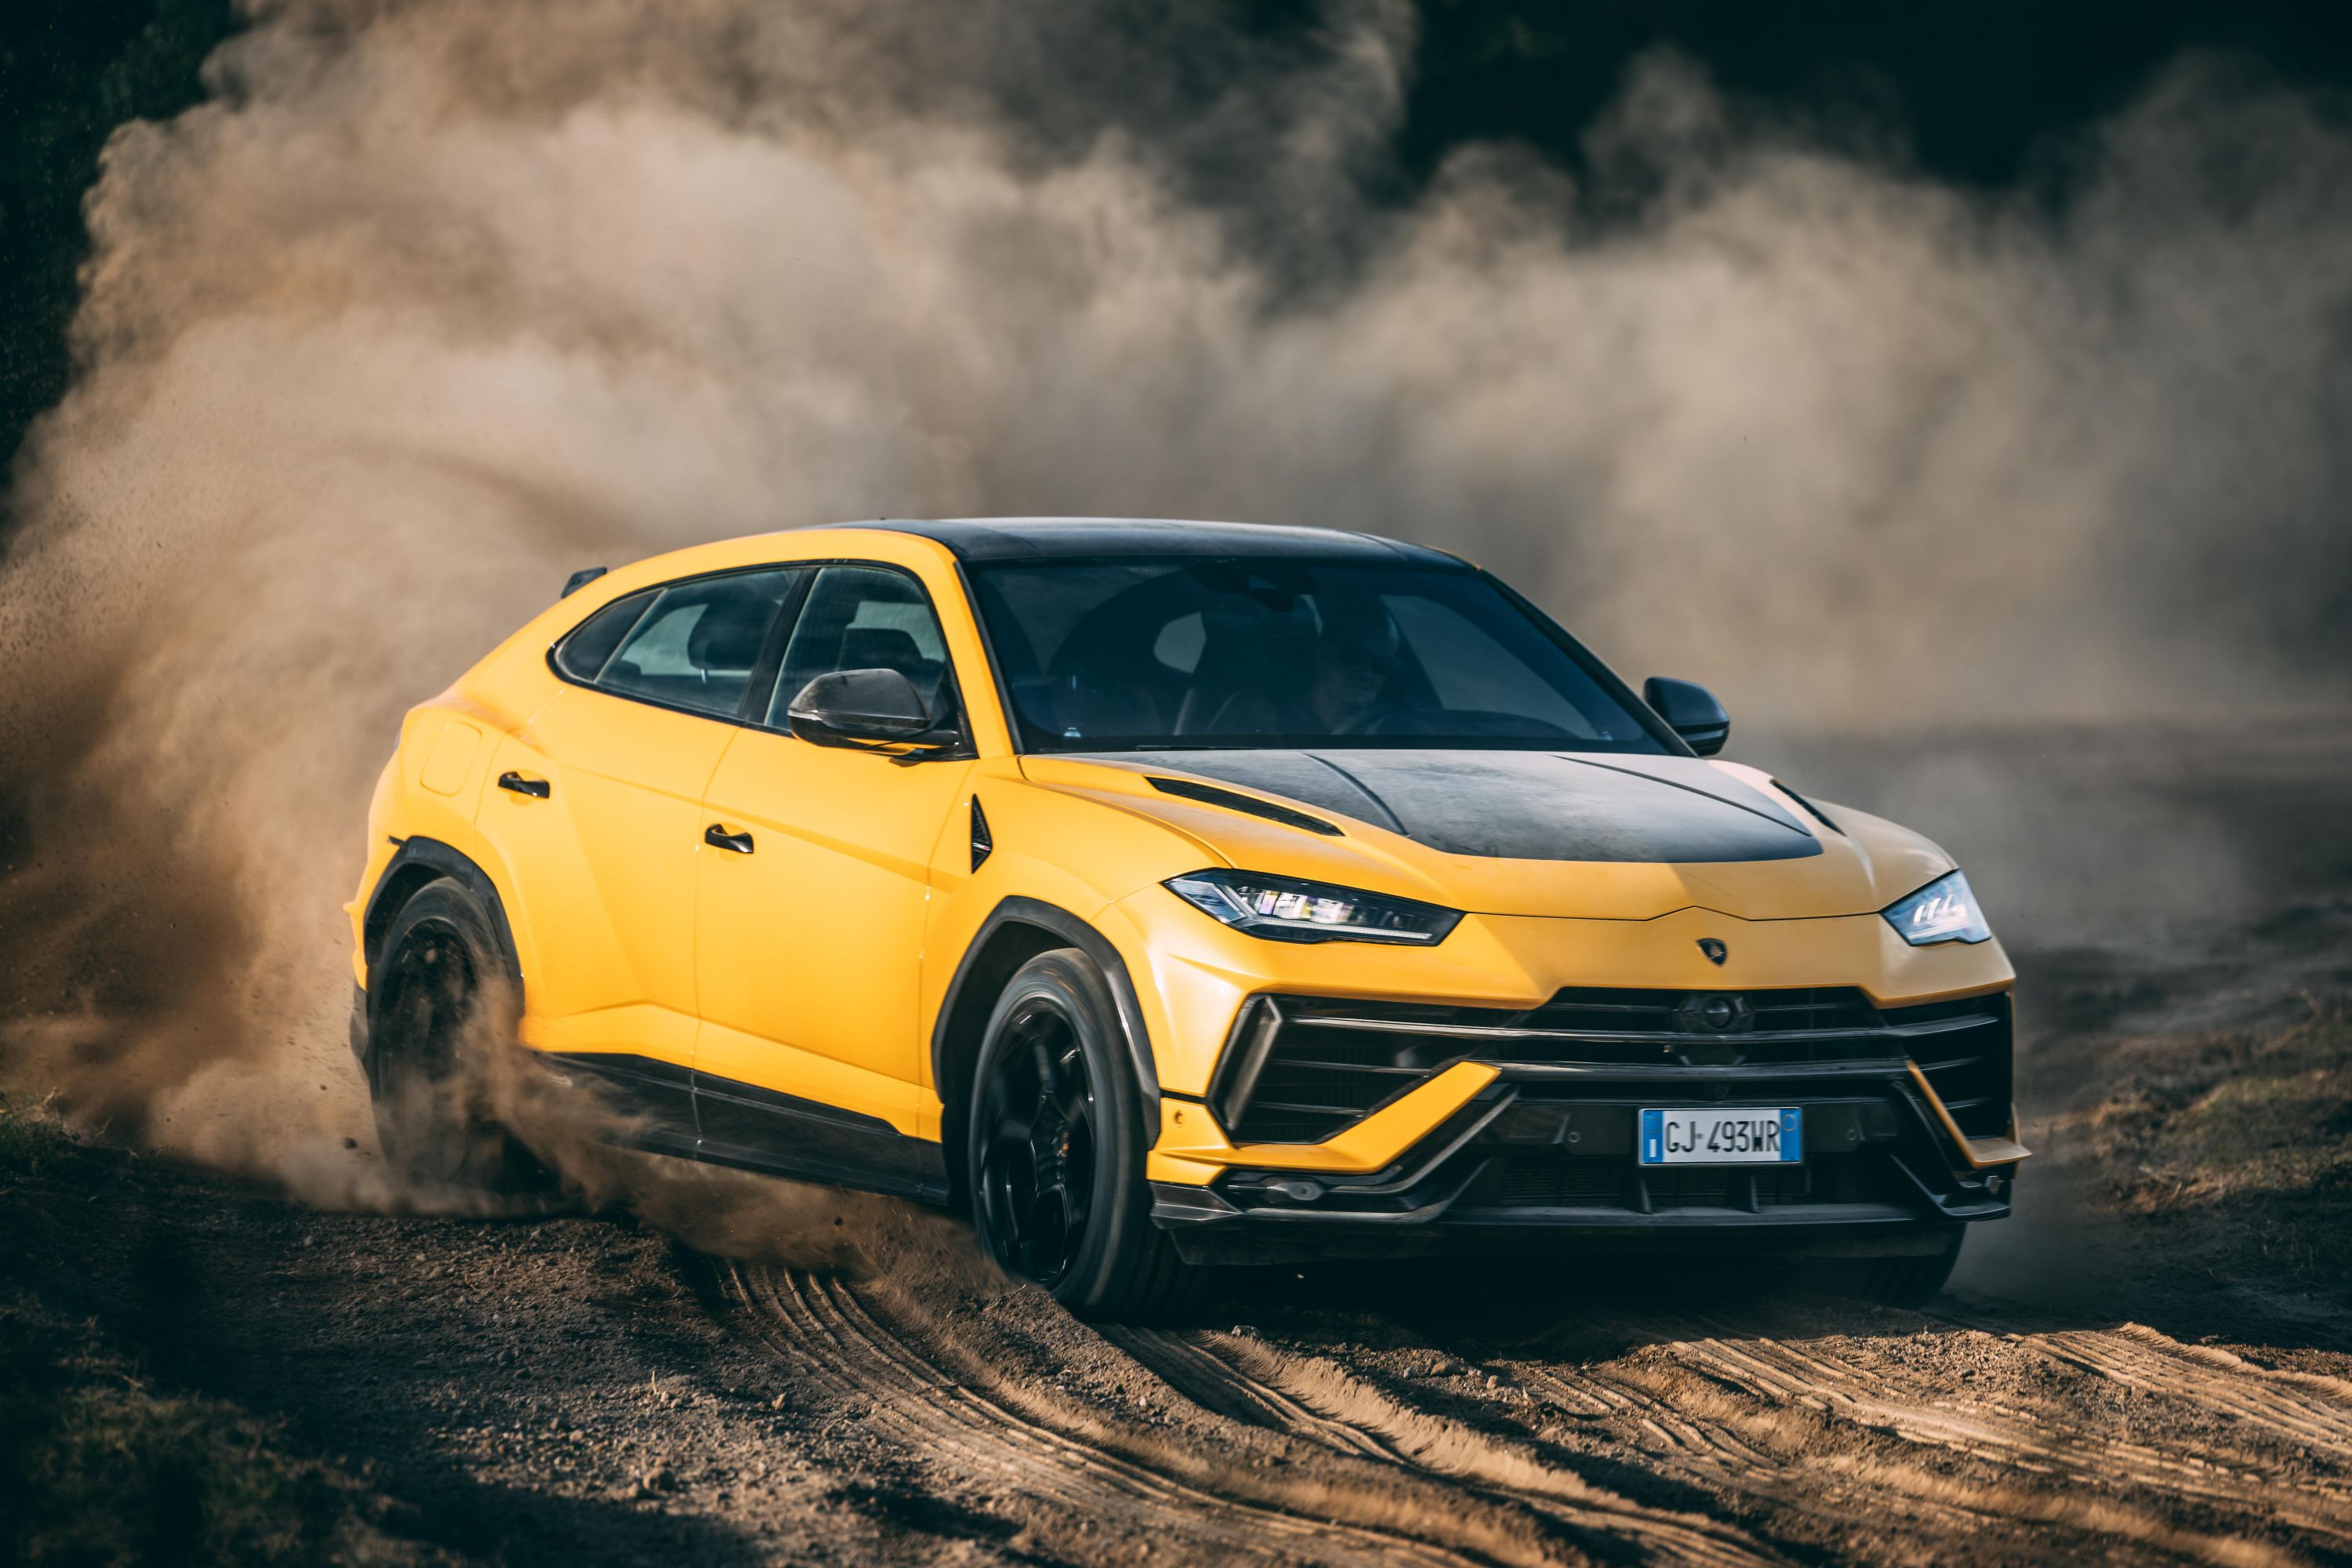 7 Reasons Why Lamborghini Urus Performante Needs to be your next